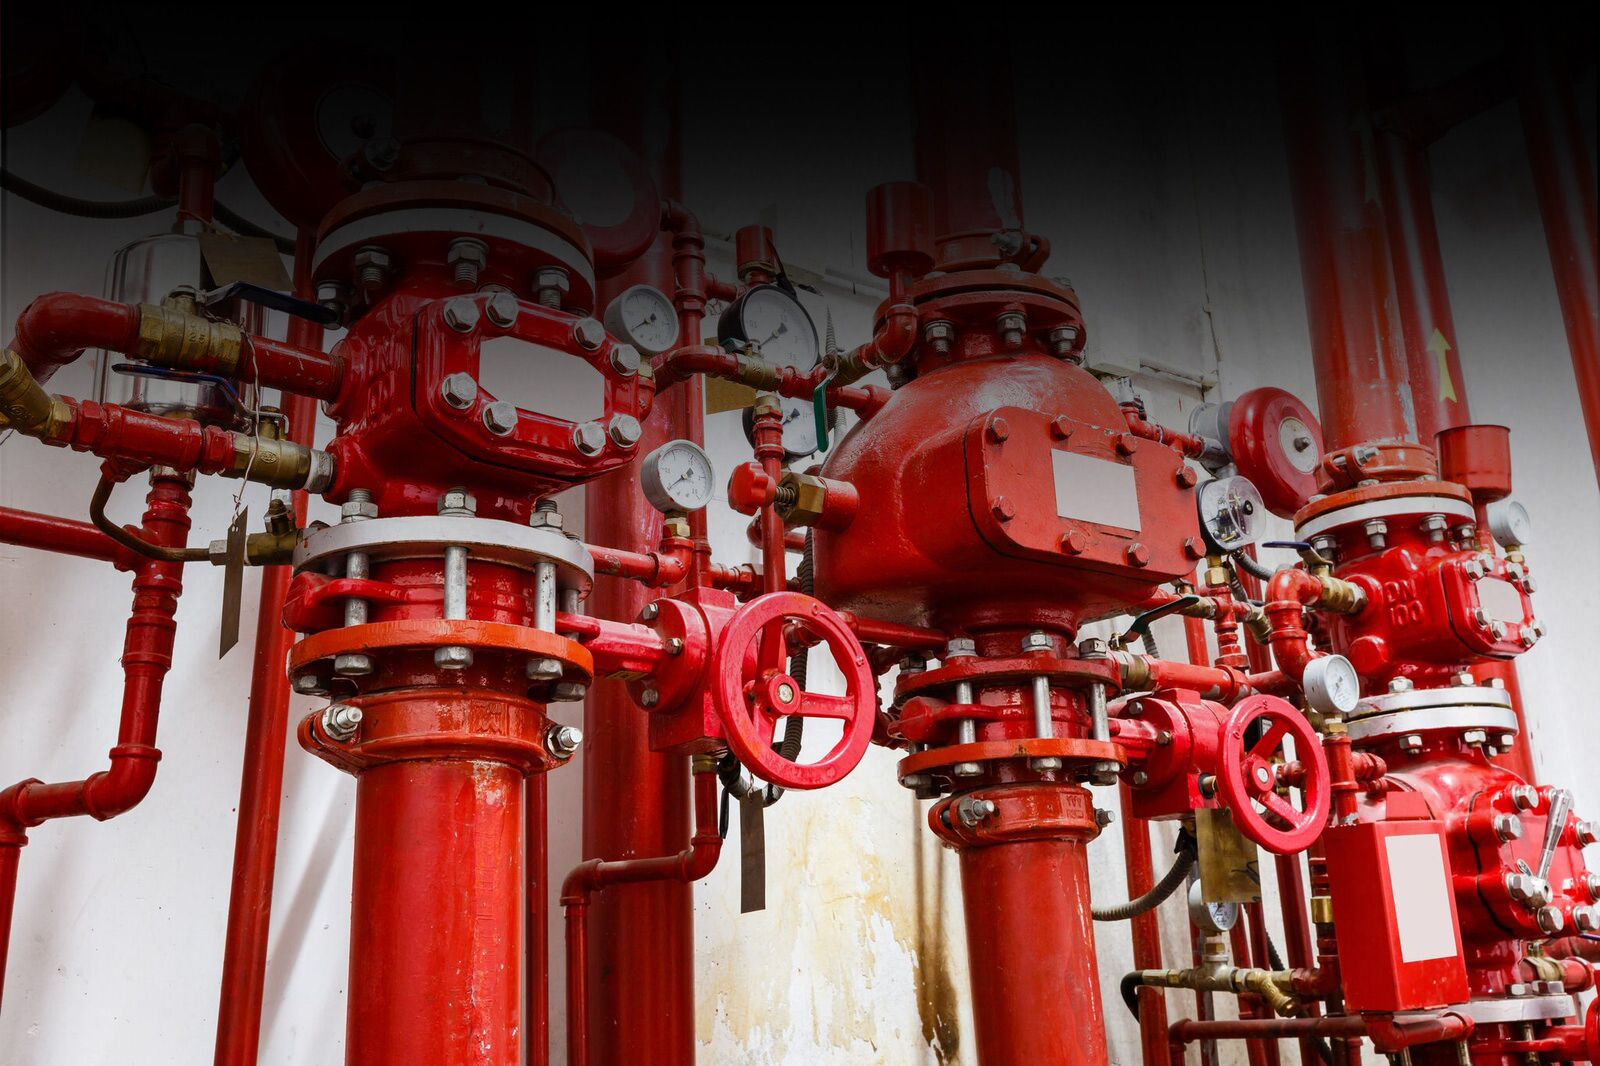 Red fire hydrant valves and valves in a building - essential safety equipment for fire prevention and control.